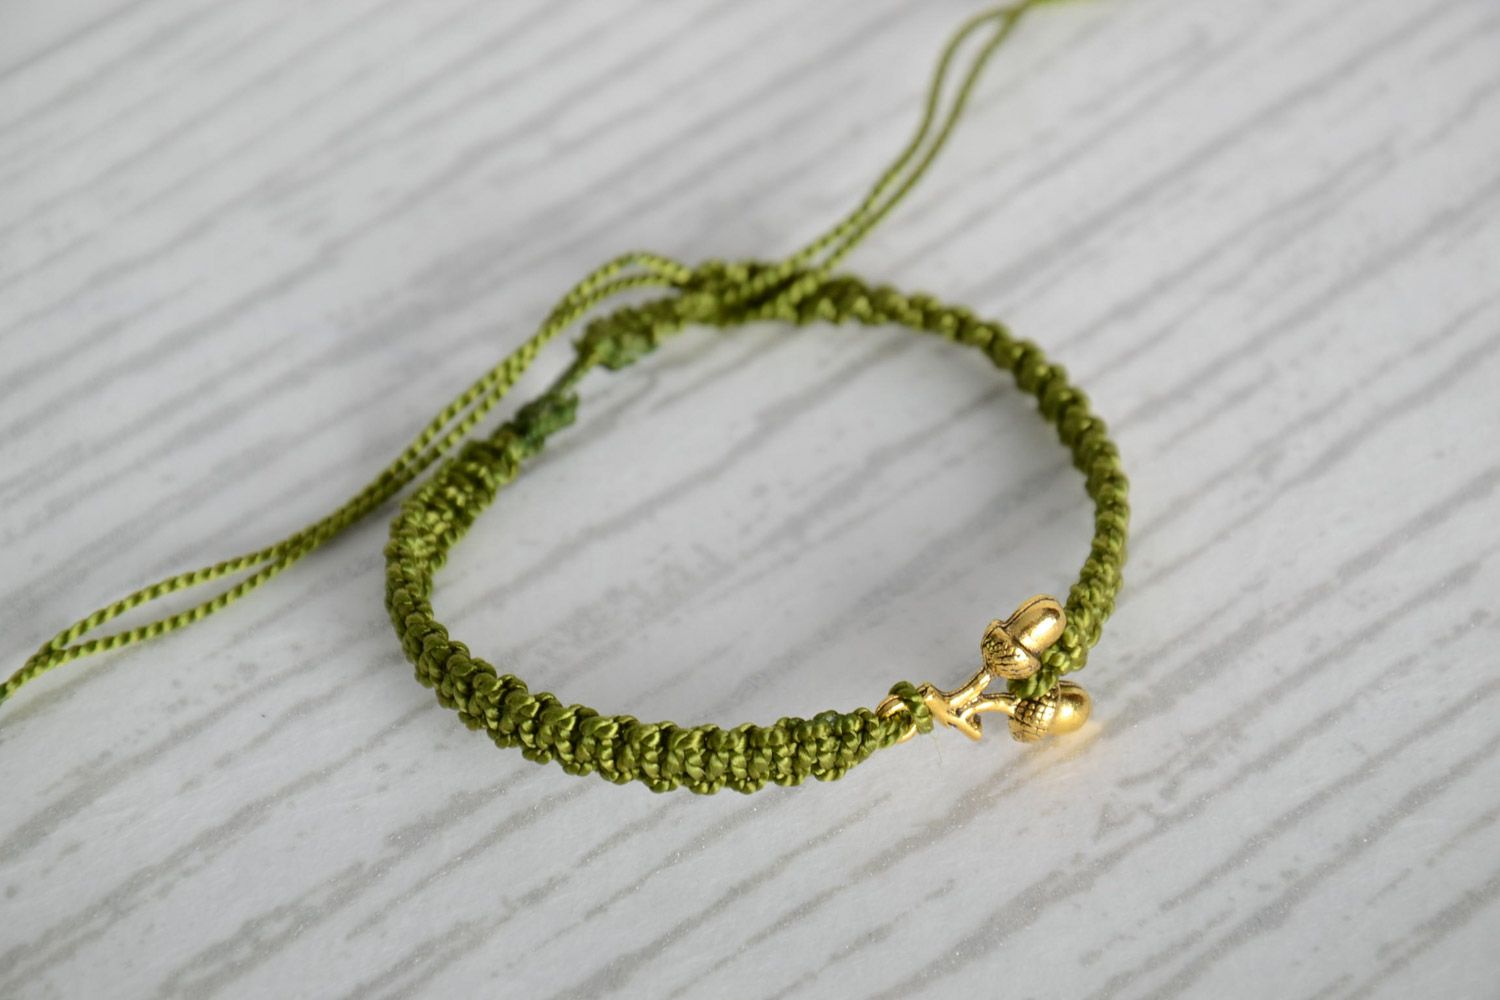 Women's handmade macrame woven thread bracelet of green color with metal charms in the shape of acorns photo 1